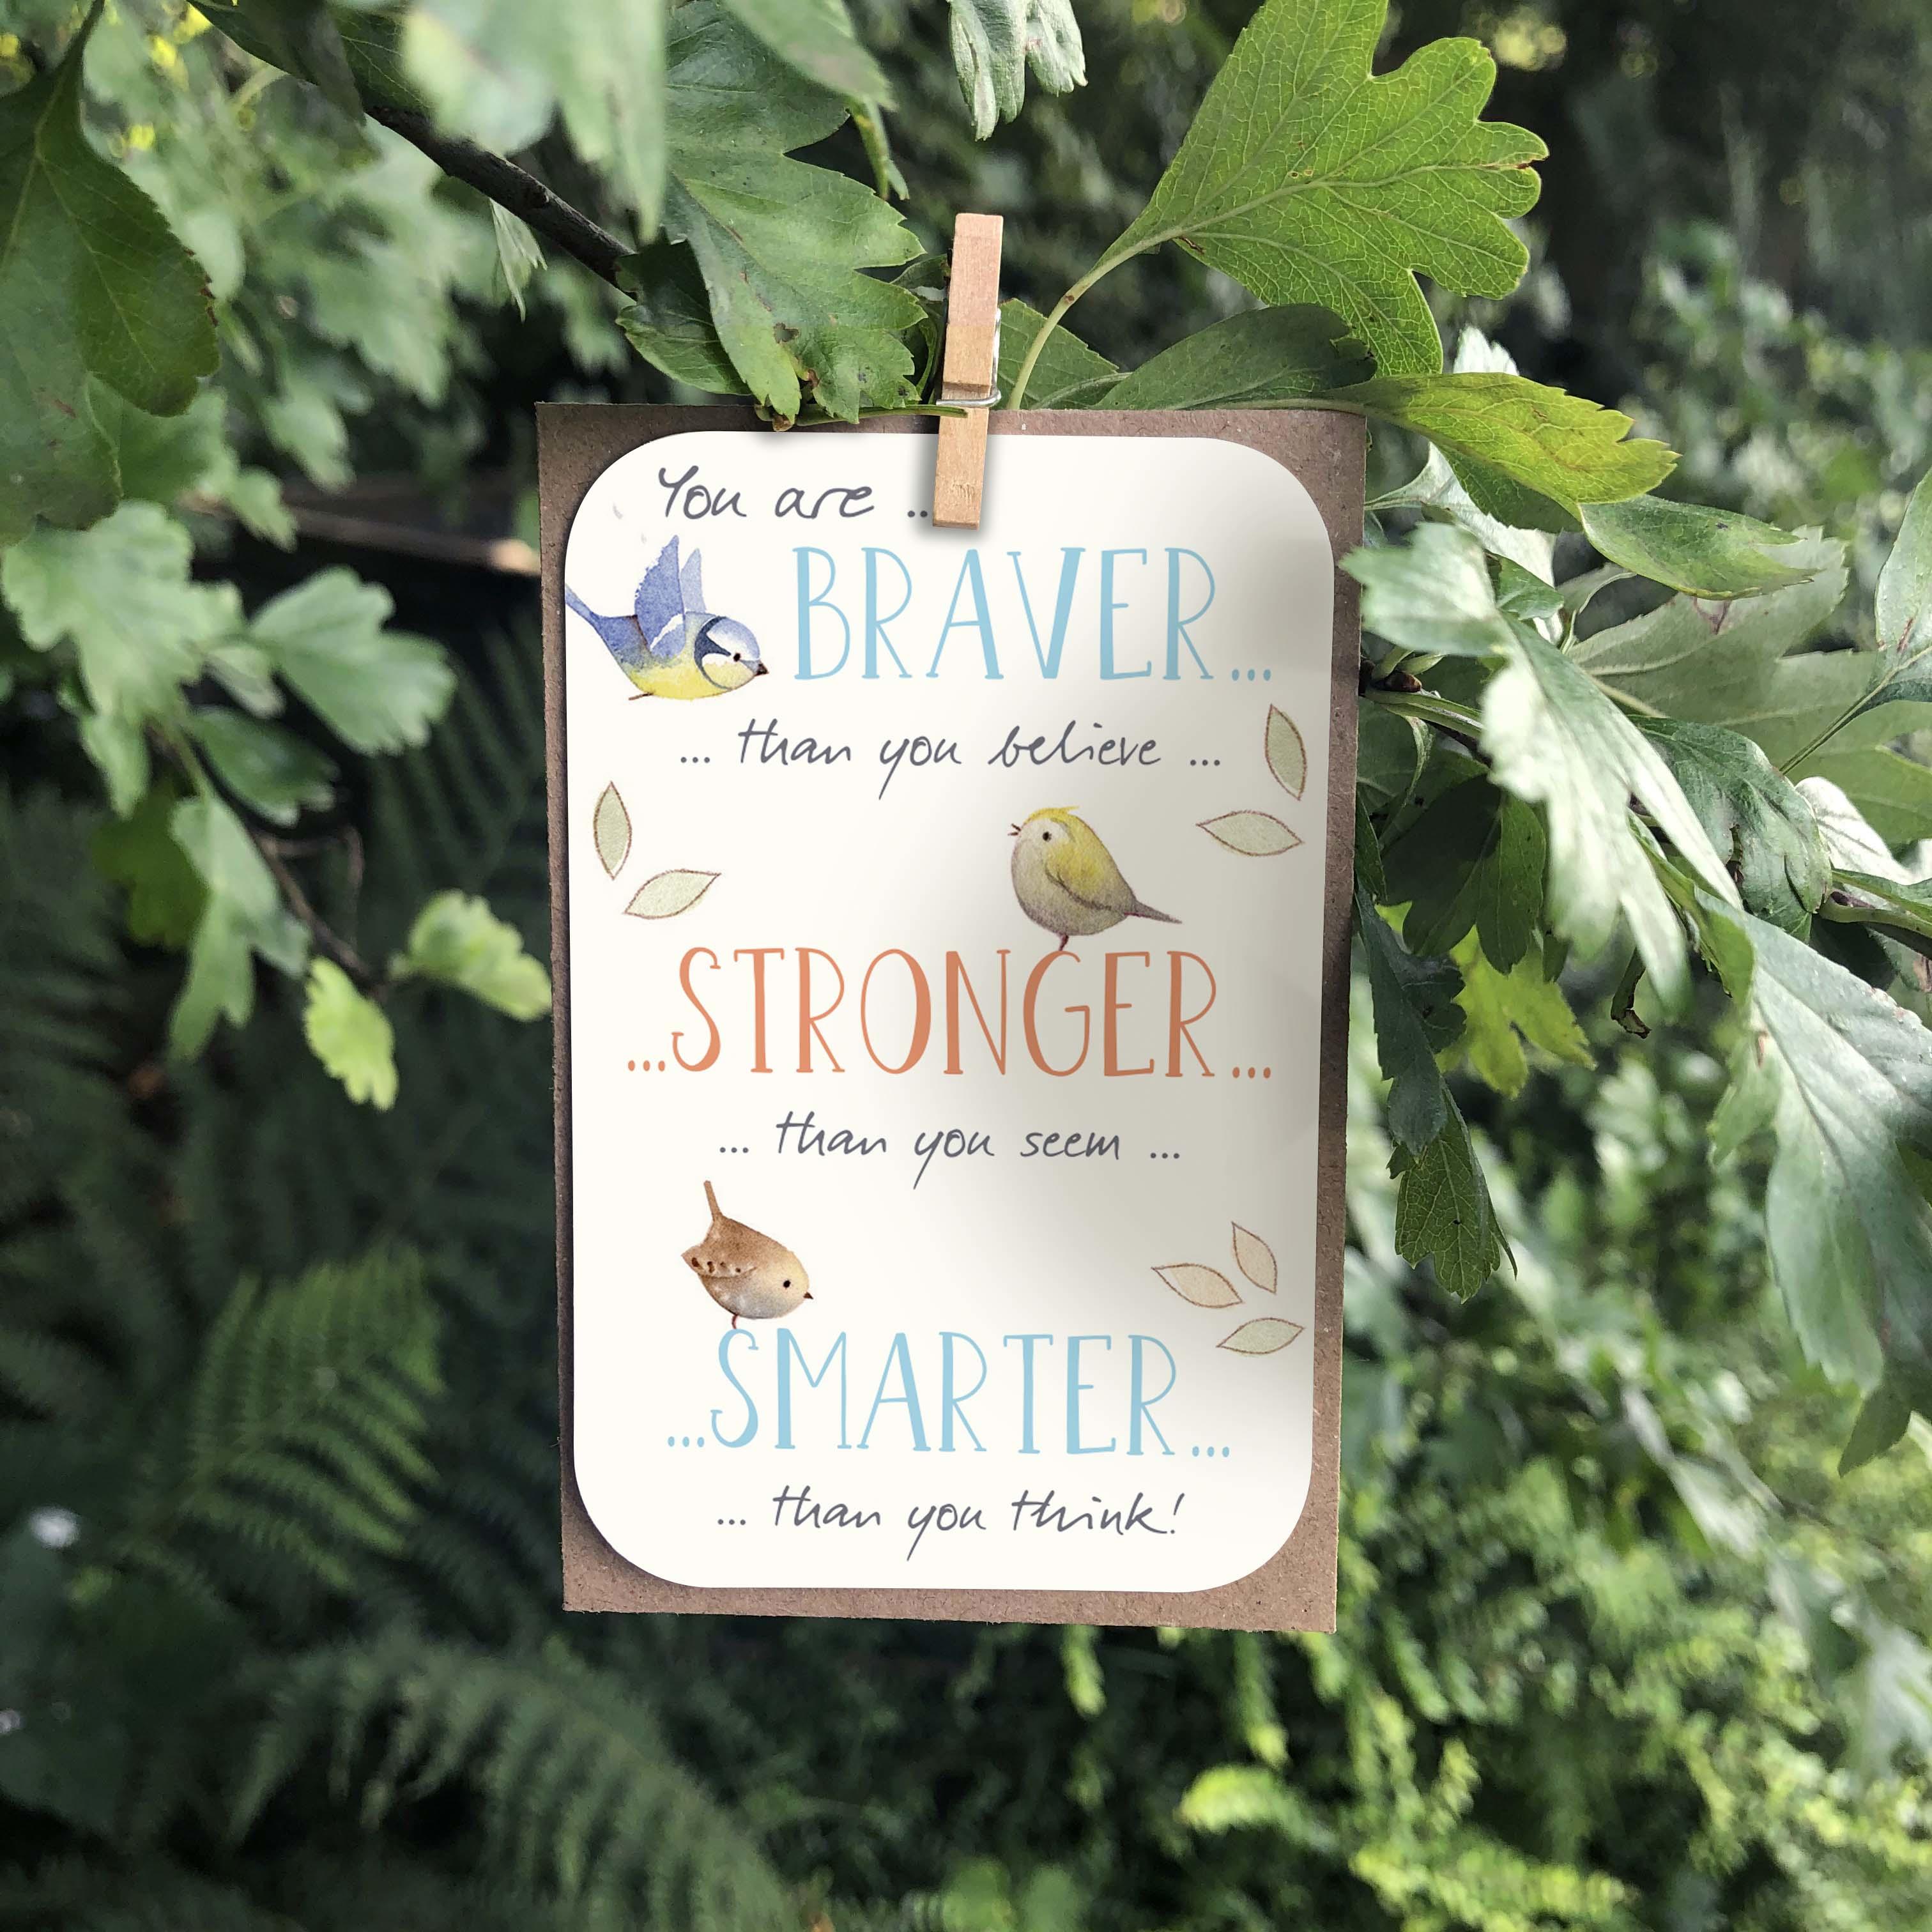 A small keepsake card with a “Braver…Stronger…Smarter” positive caption. Features three illustrated cute birds.